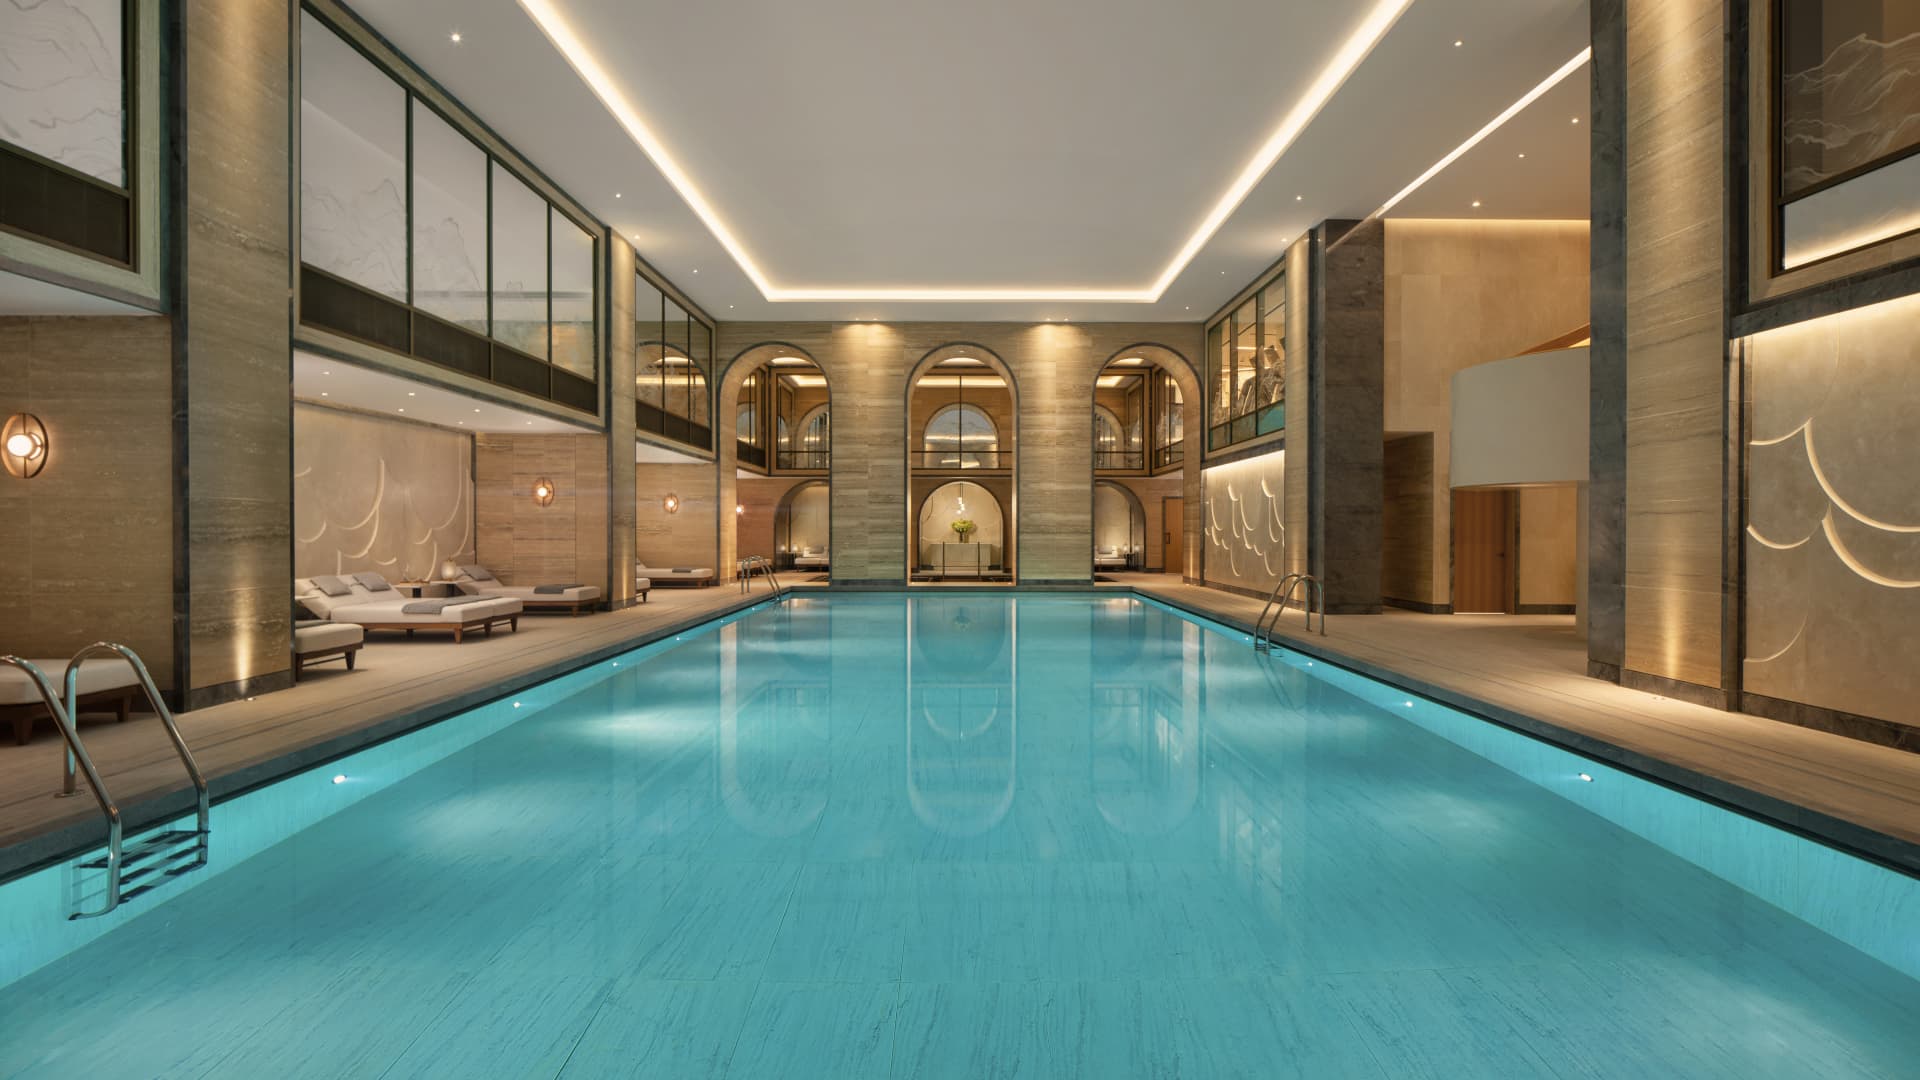 A 65-foot subterranean swimming pool at the heart of Raffles London's four-story spa, which includes nine Guerlain treatment rooms and a gym.